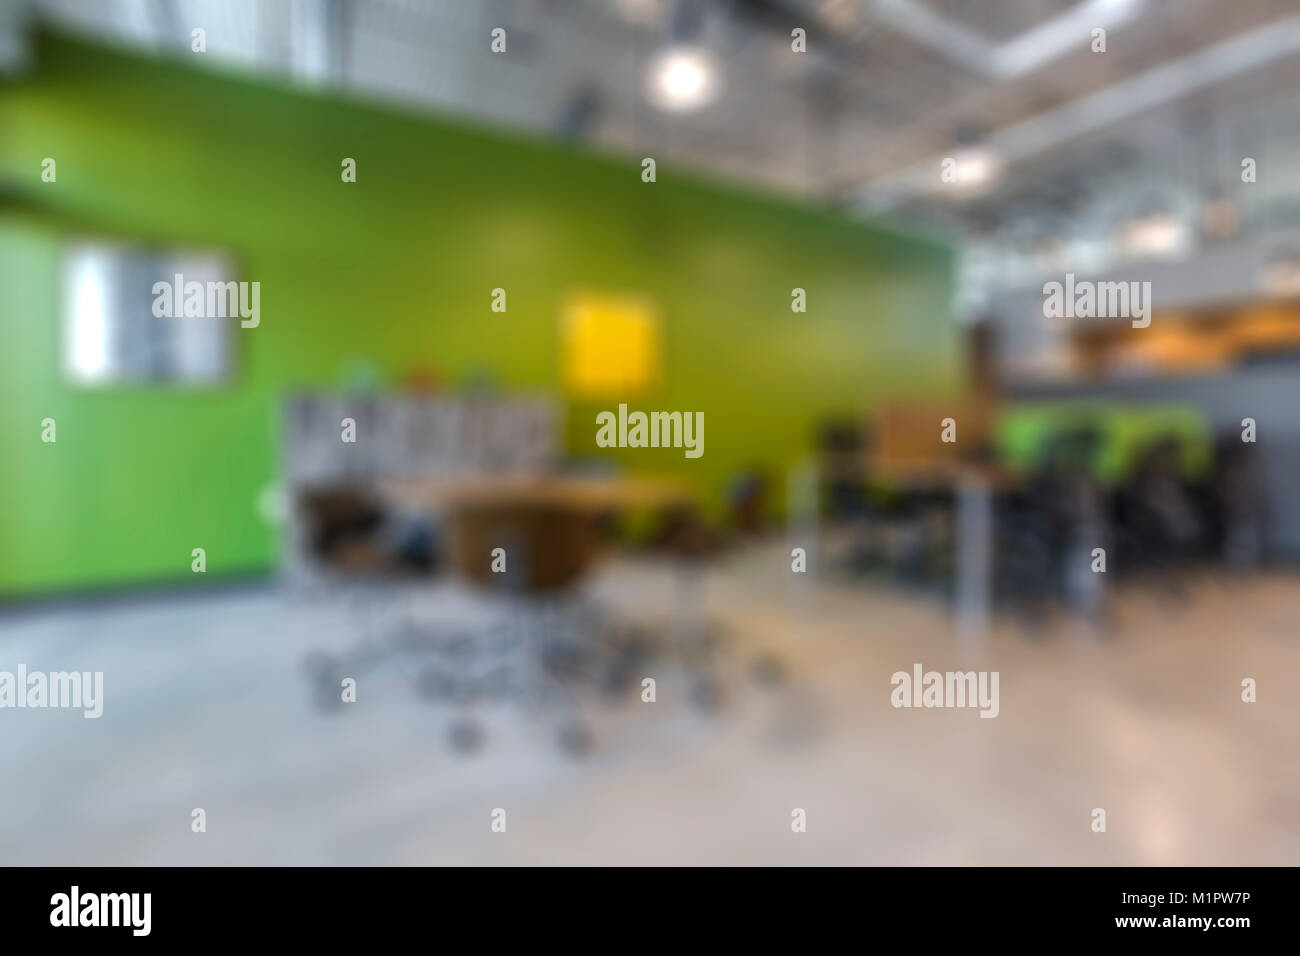 Abstract background of offices interior Stock Photo